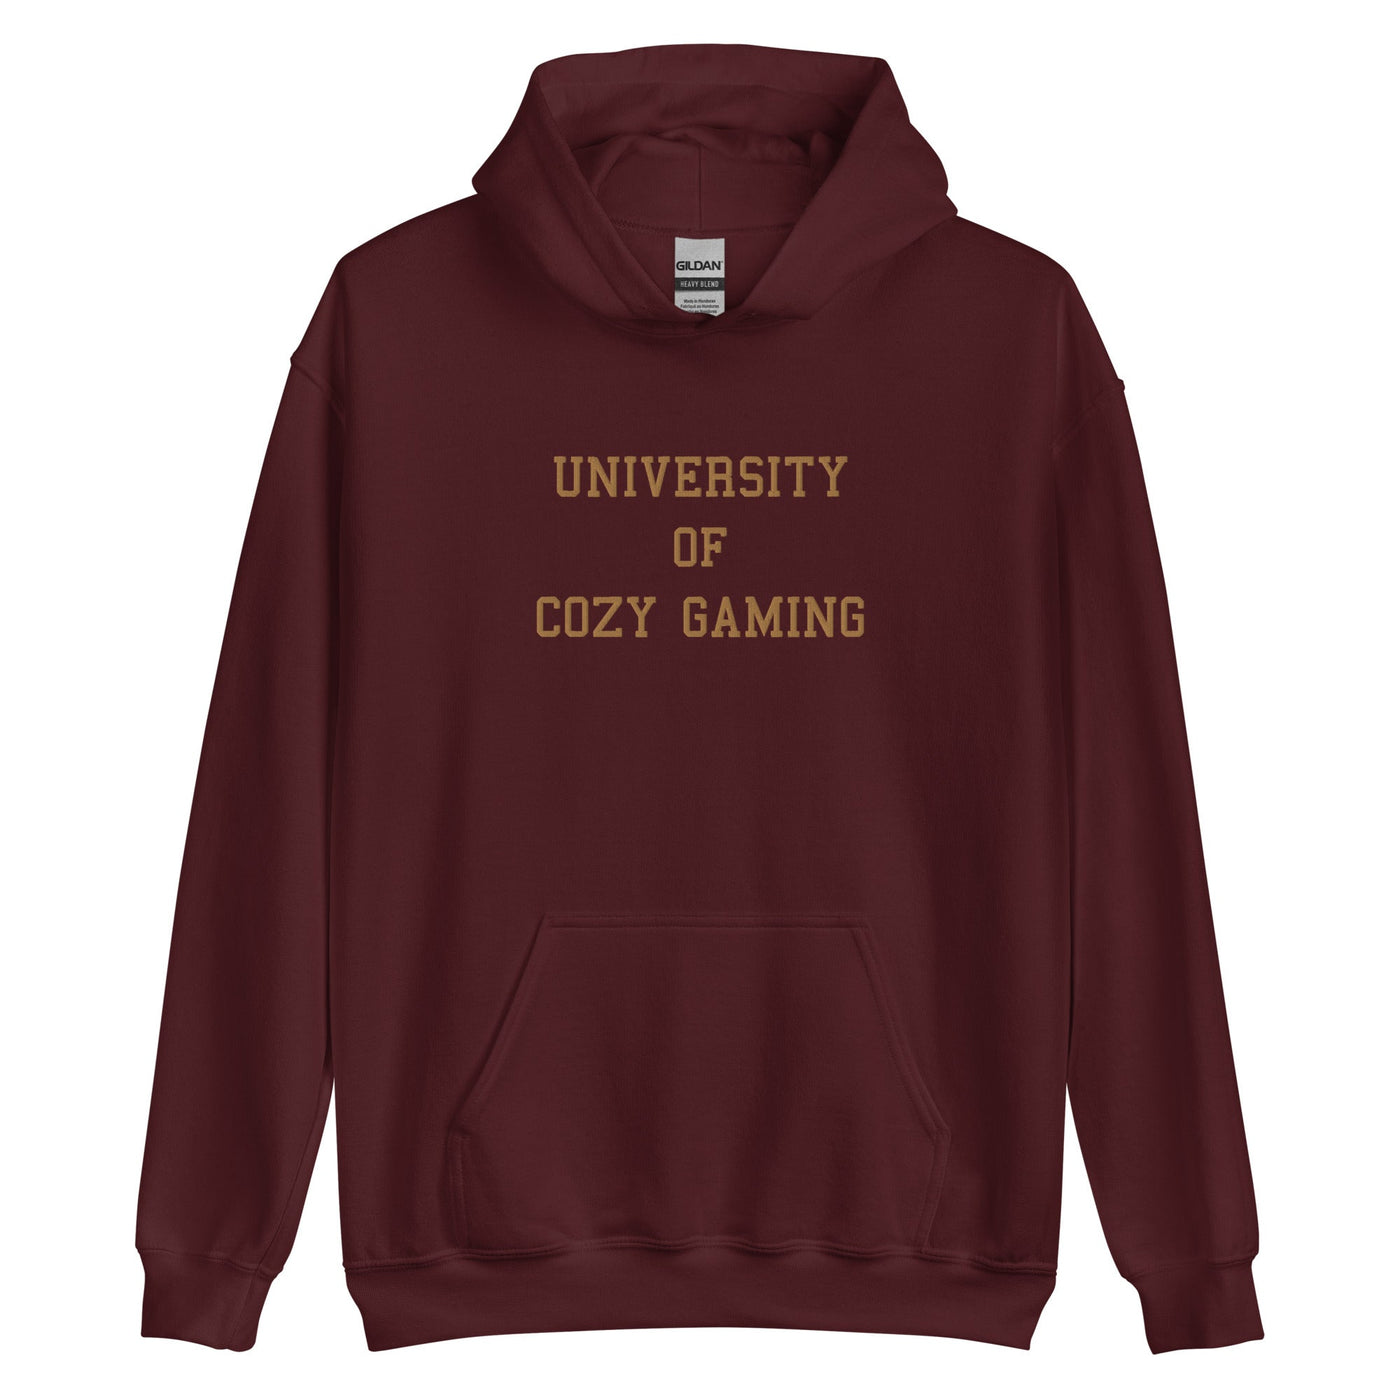 University of Cozy Gaming | Embroidered Unisex Hoodie | Cozy Gamer Threads and Thistles Inventory Maroon S 